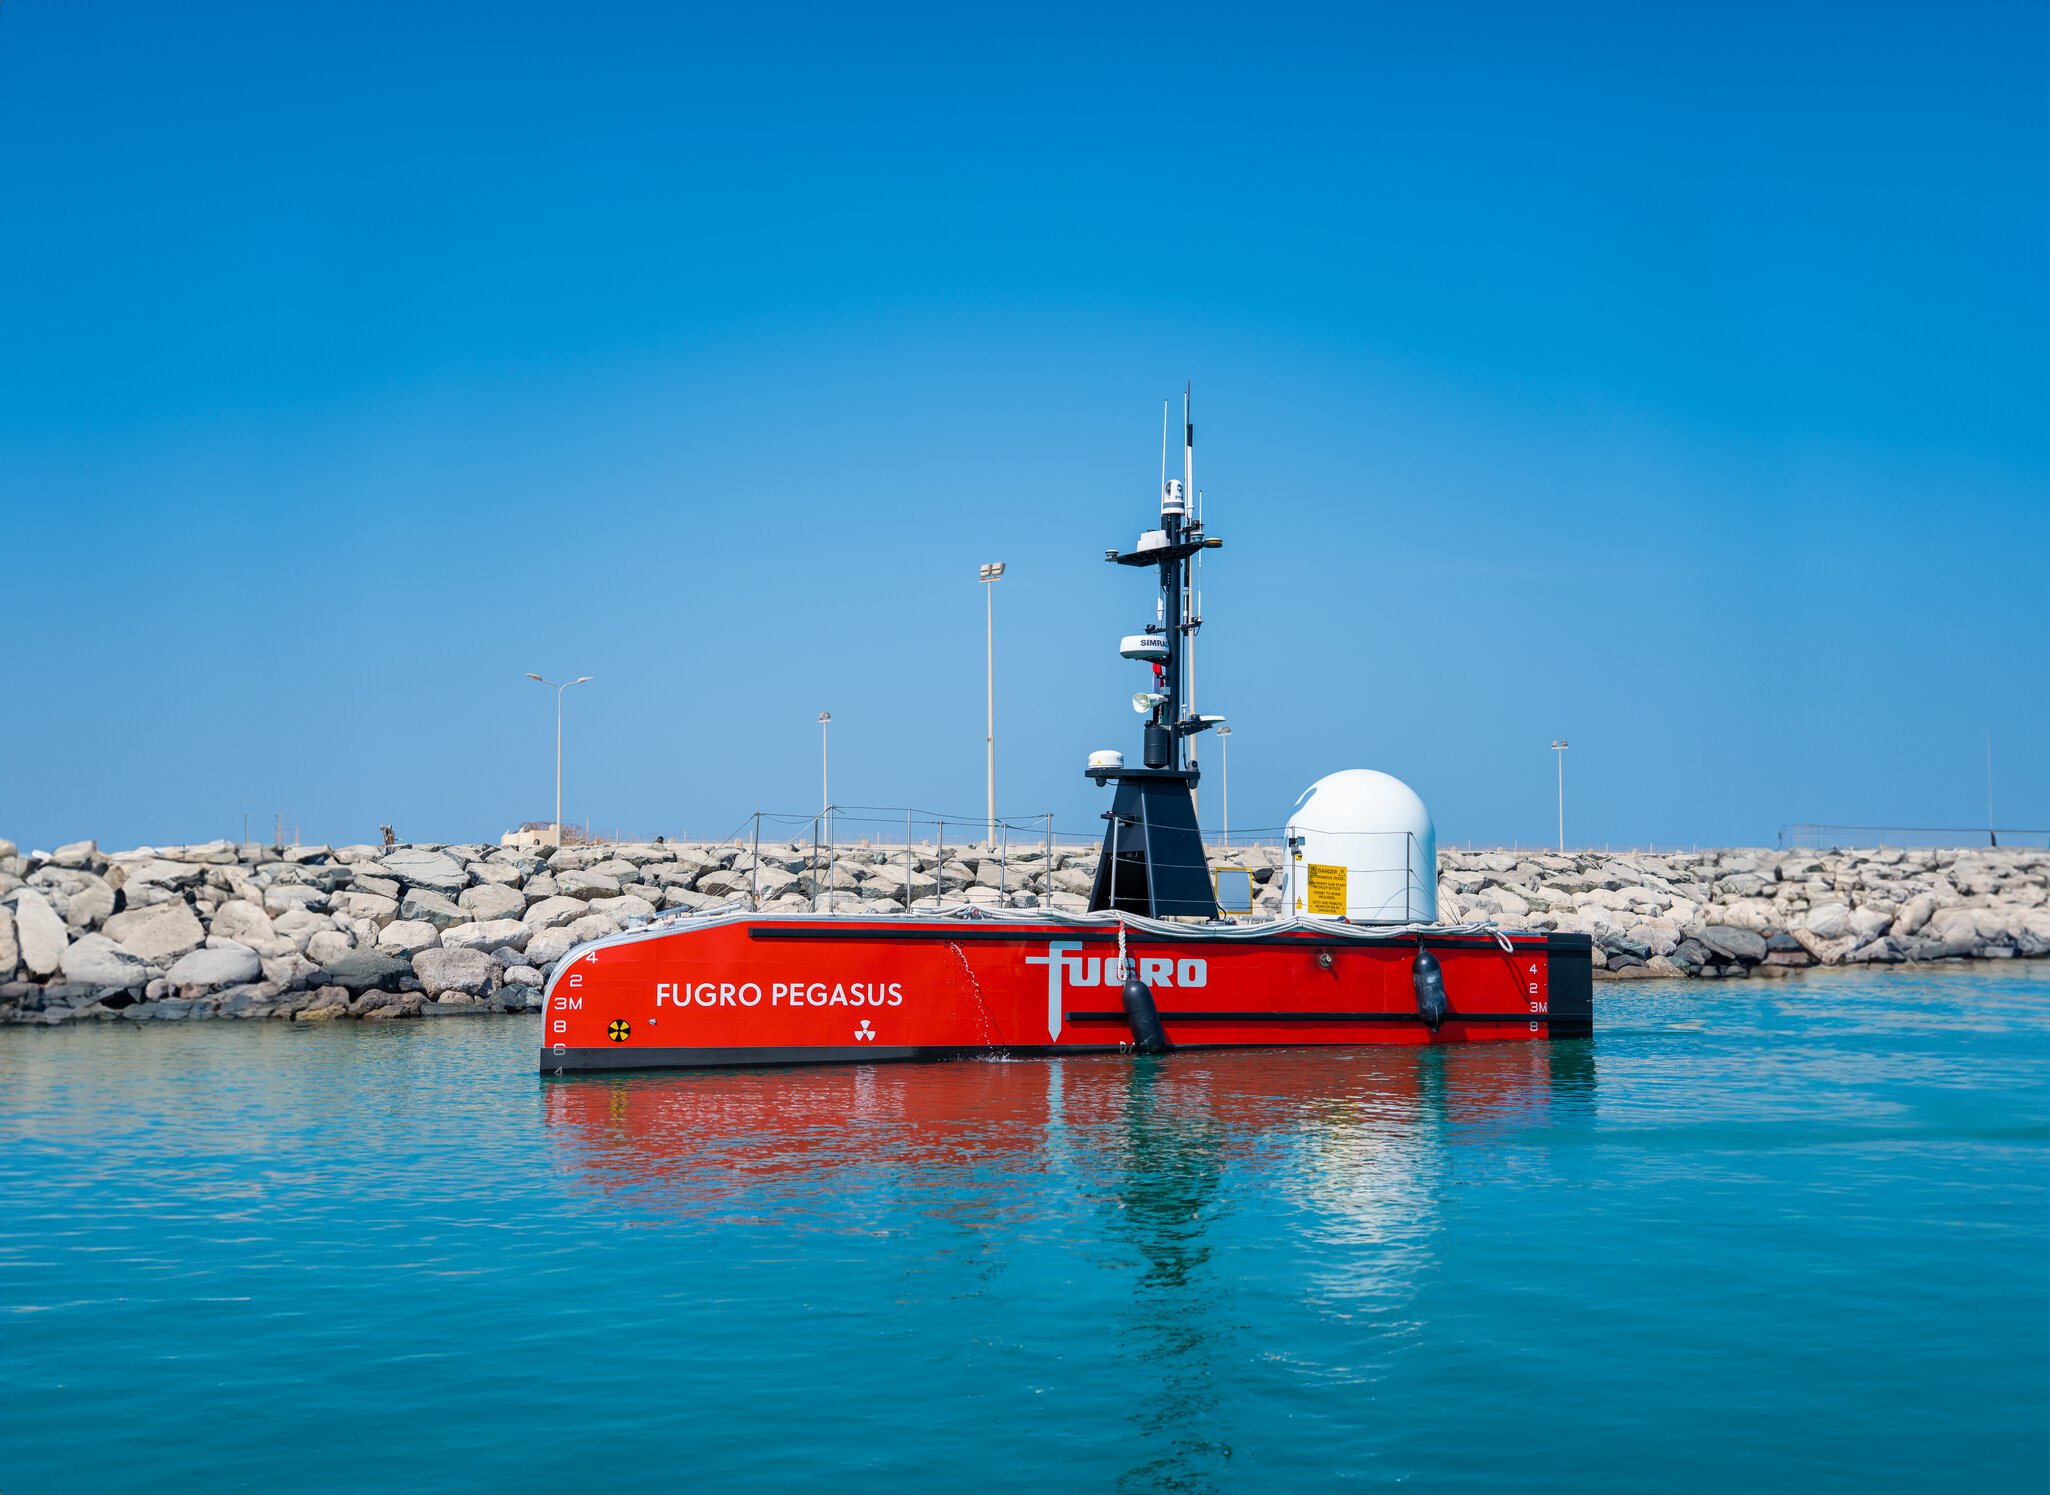 Fugro completes the Middle East’s first remotely operated subsea inspection using a low-carbon emission uncrewed surface vessel (USV)